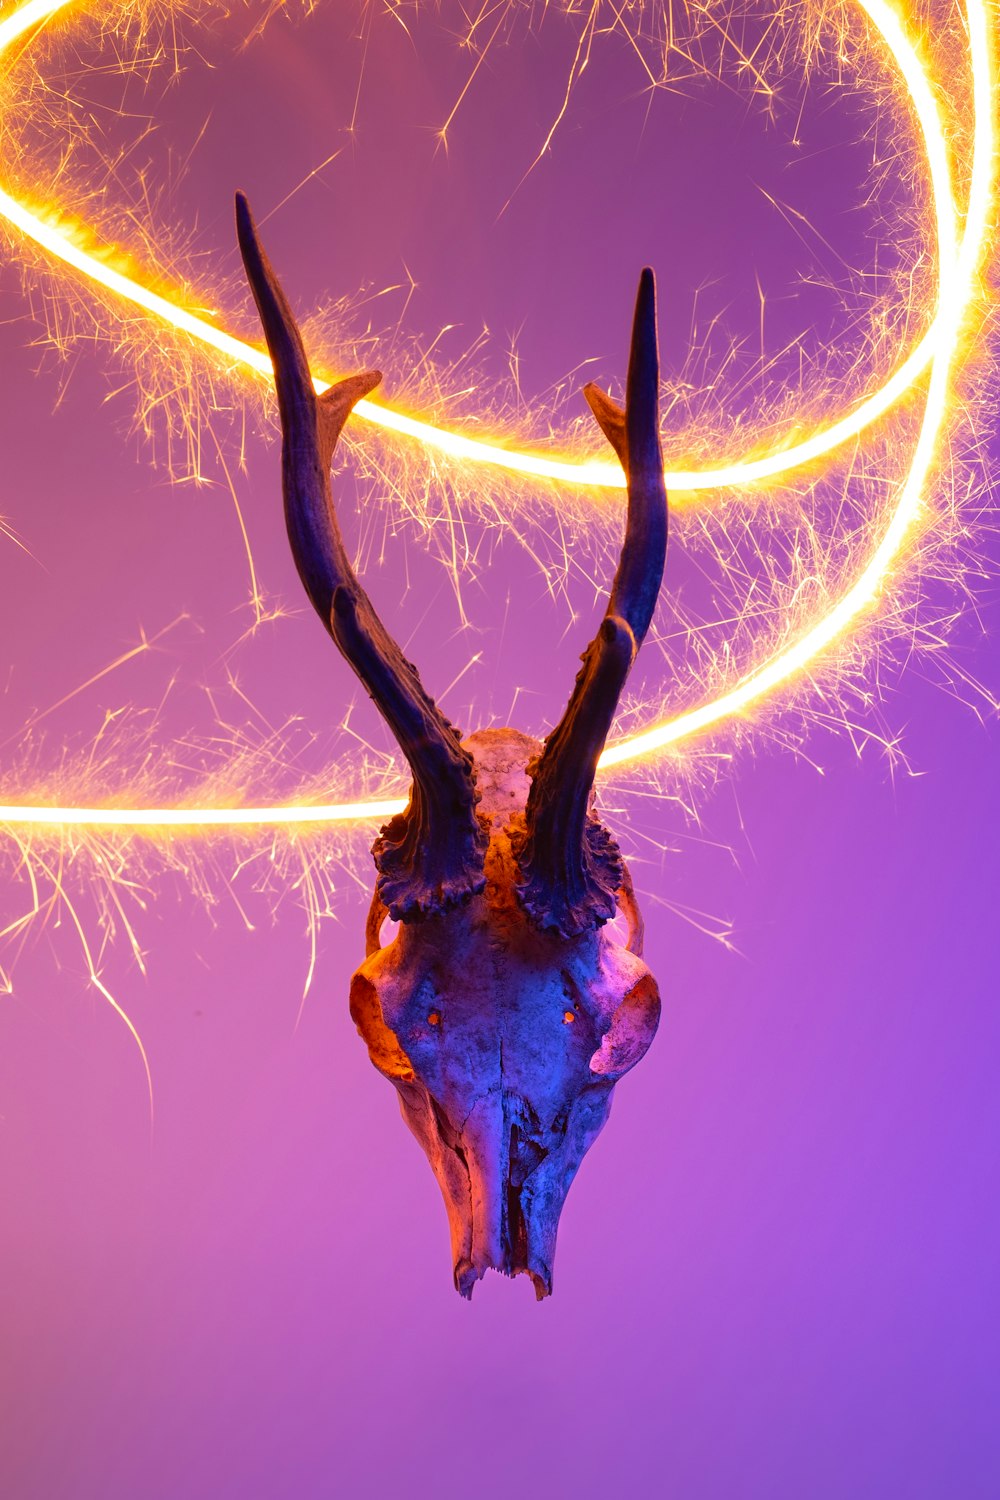 a deer's head with long horns is lit up by fire